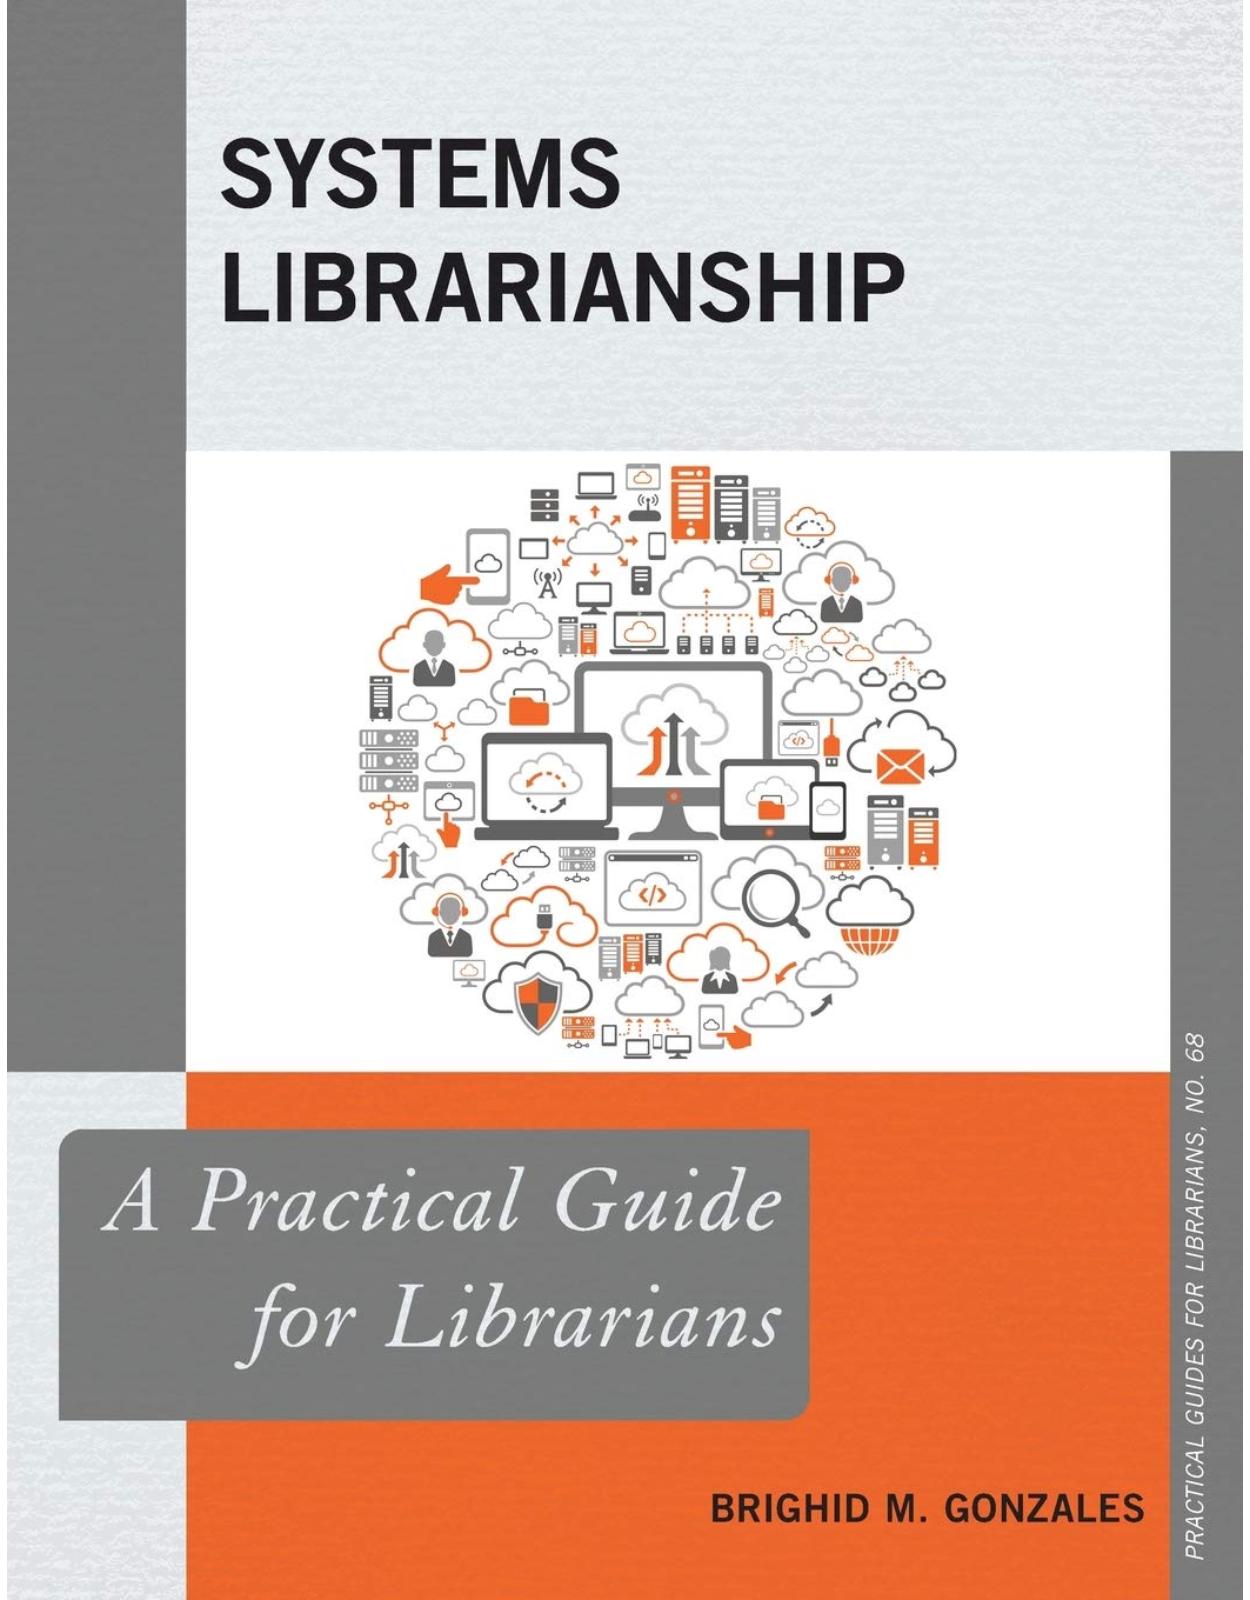 Systems Librarianship (Practical Guides for Librarians)